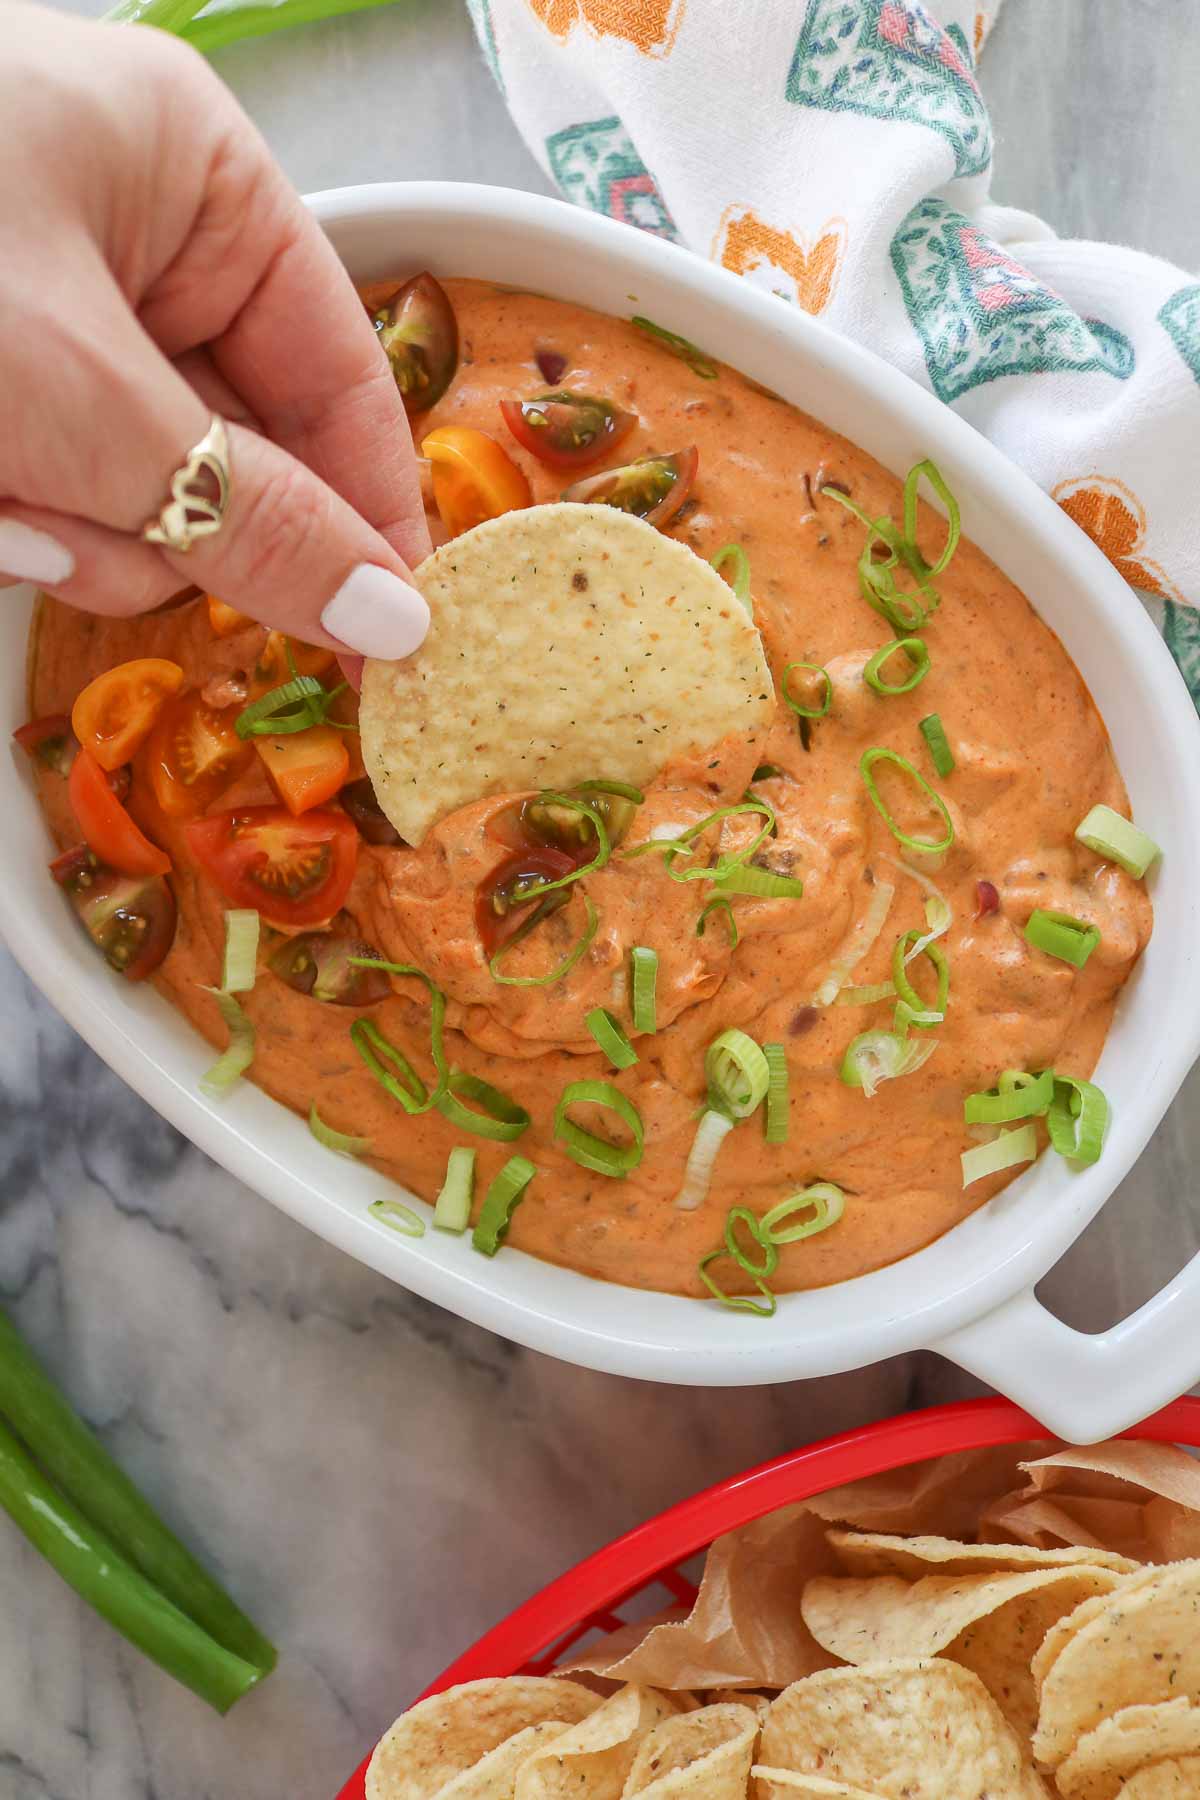 Hand dipping a tortilla chip into a dish of chili cream cheese dip.